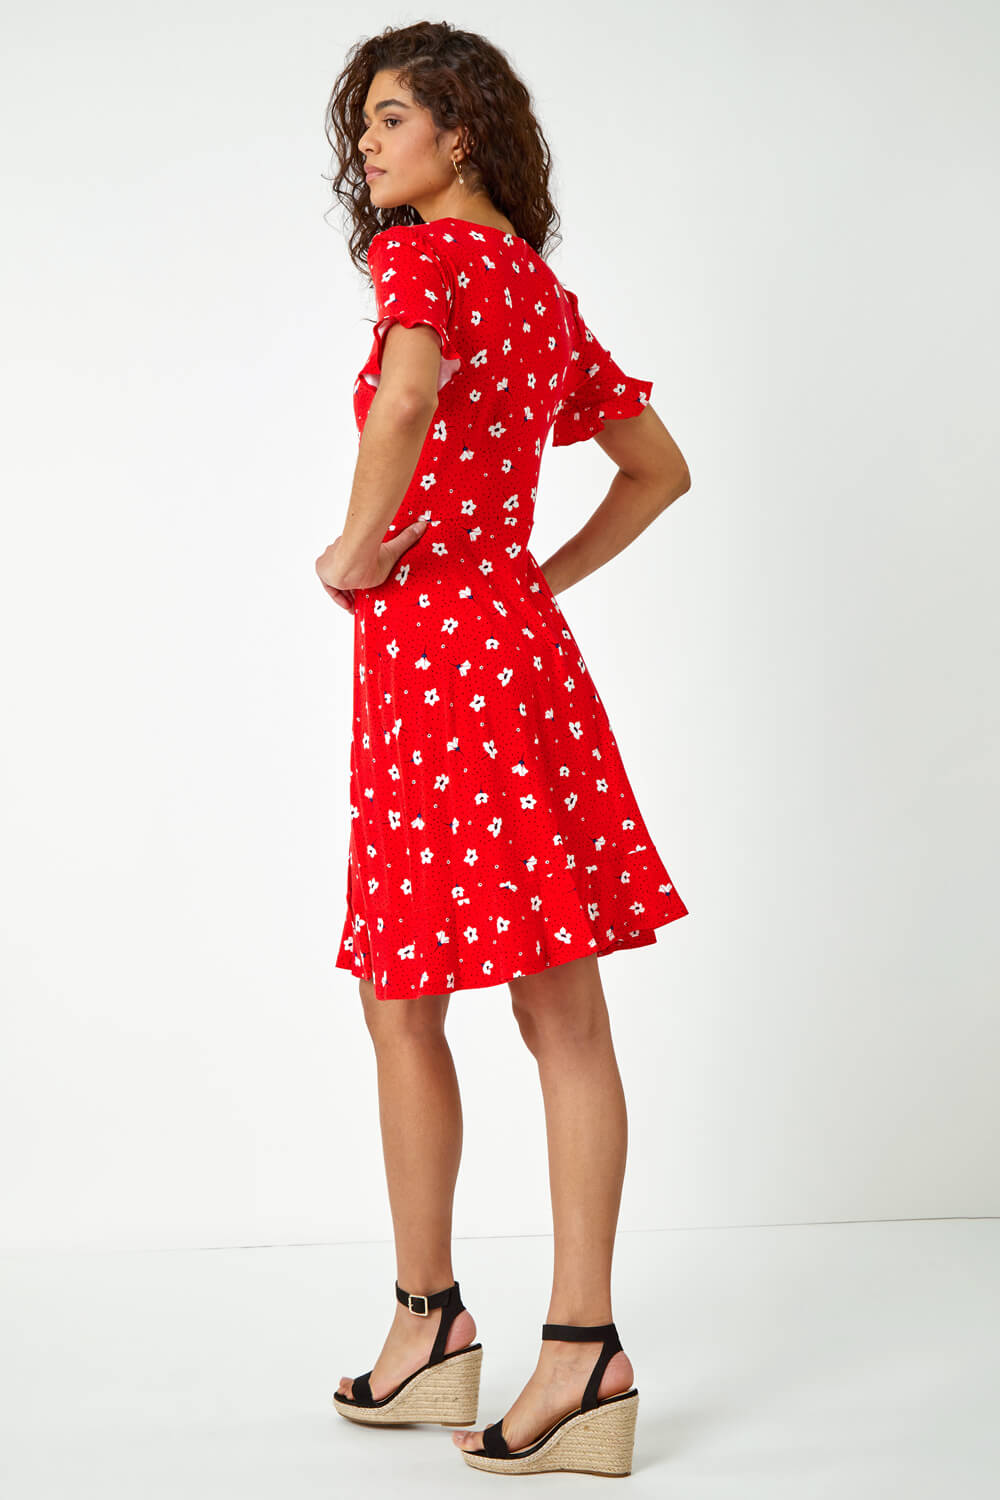 Red Floral Stretch Jersey Tea Dress, Image 3 of 6